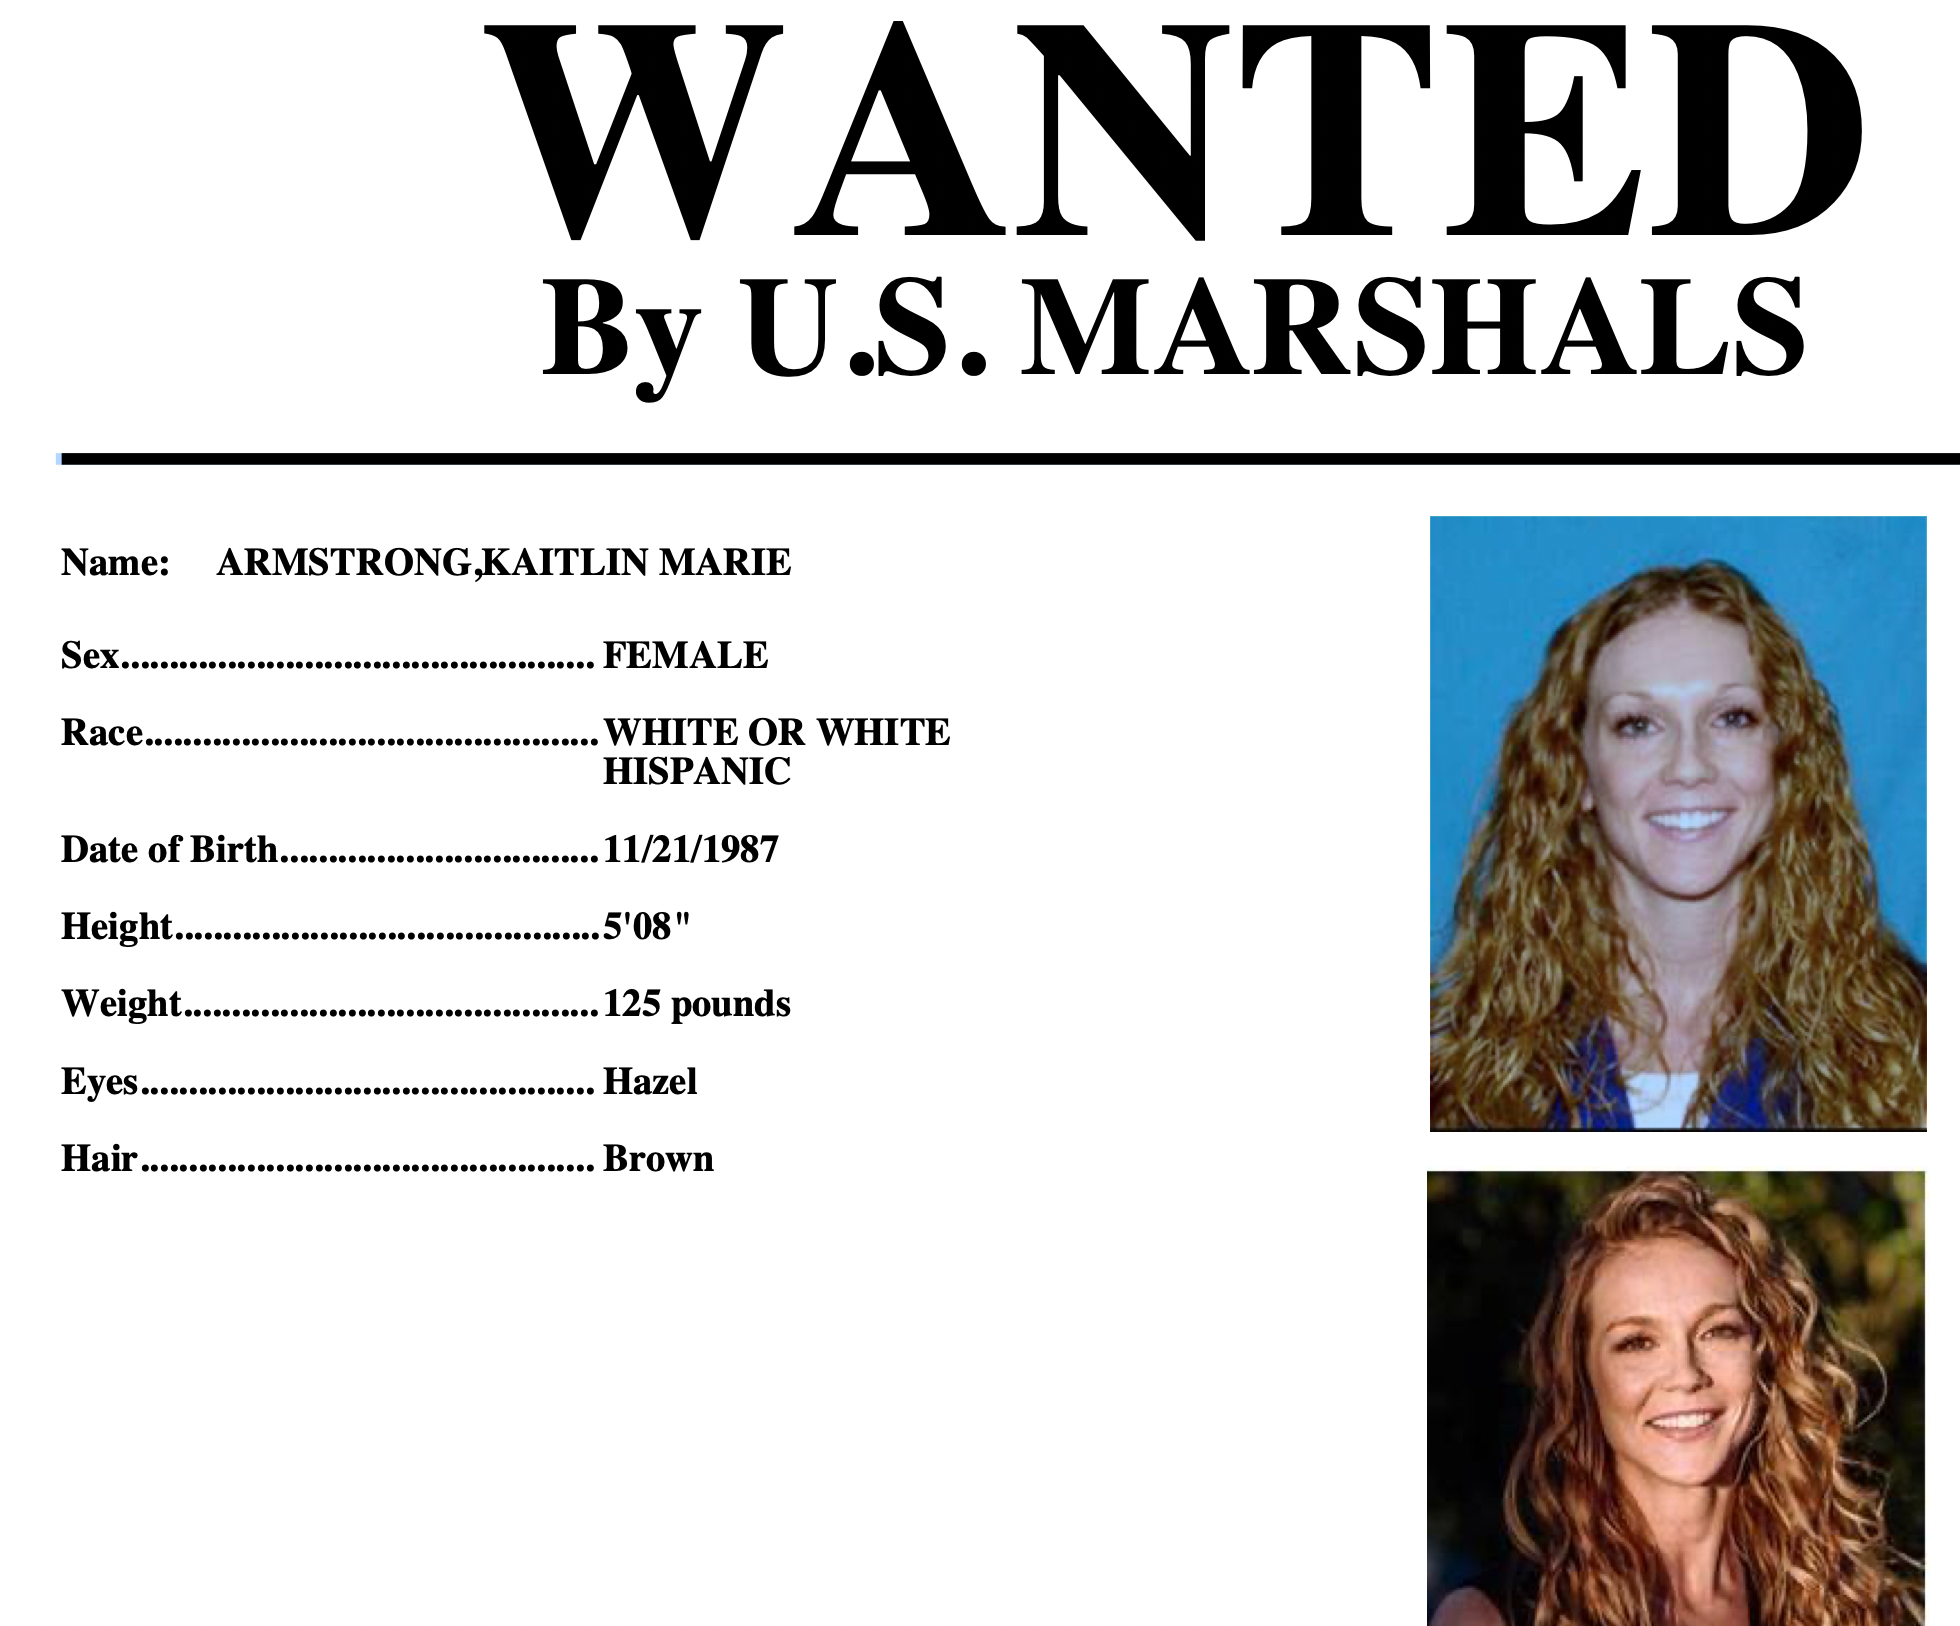 A wanted poster for Kaitlin Armstrong, who has not been seen since 13 May